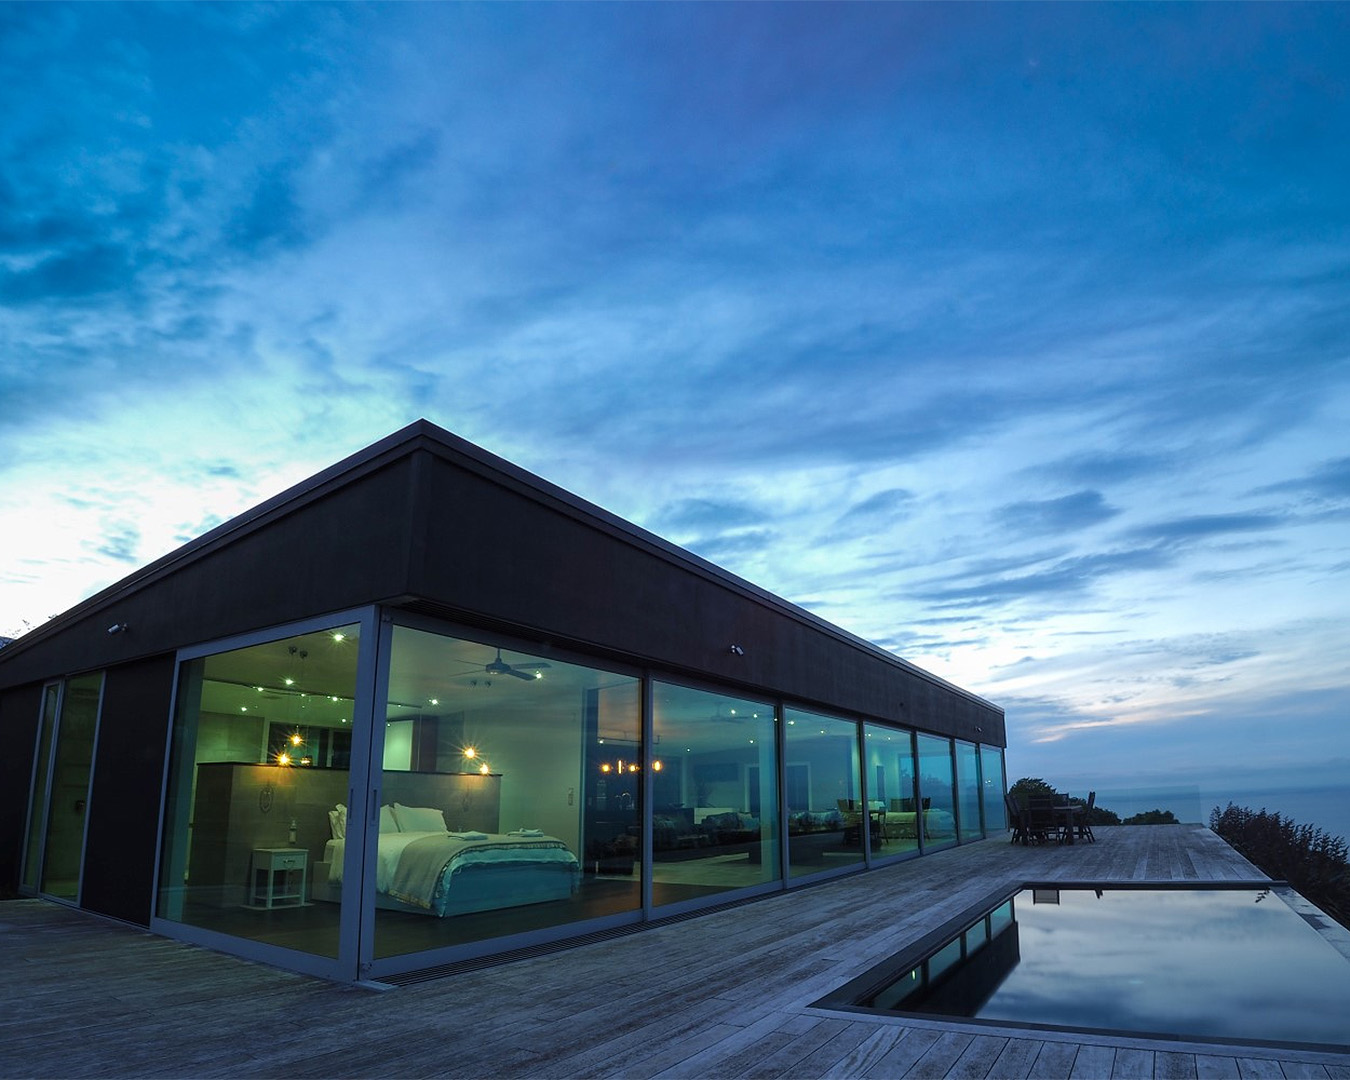 The outside of the lovely glasshouse, showing an infinity pool to the right under a sky at dusk.